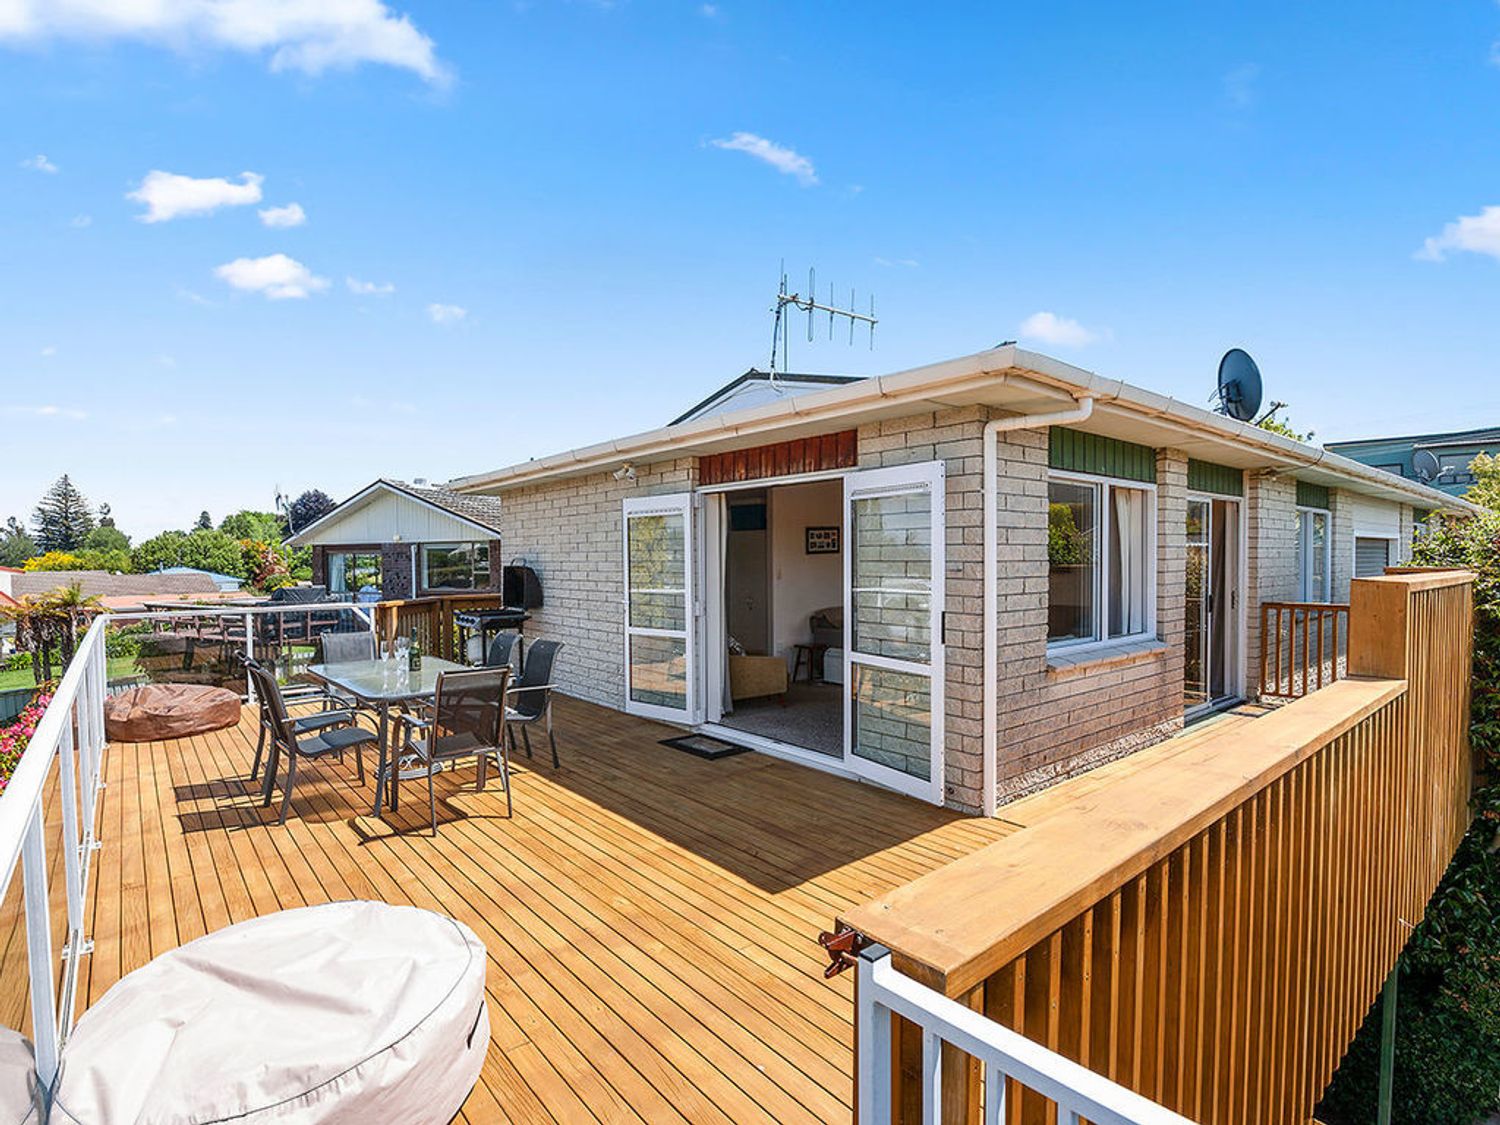 Central Riverside Retreat - Taupo Holiday Home -  - 1032323 - photo 1